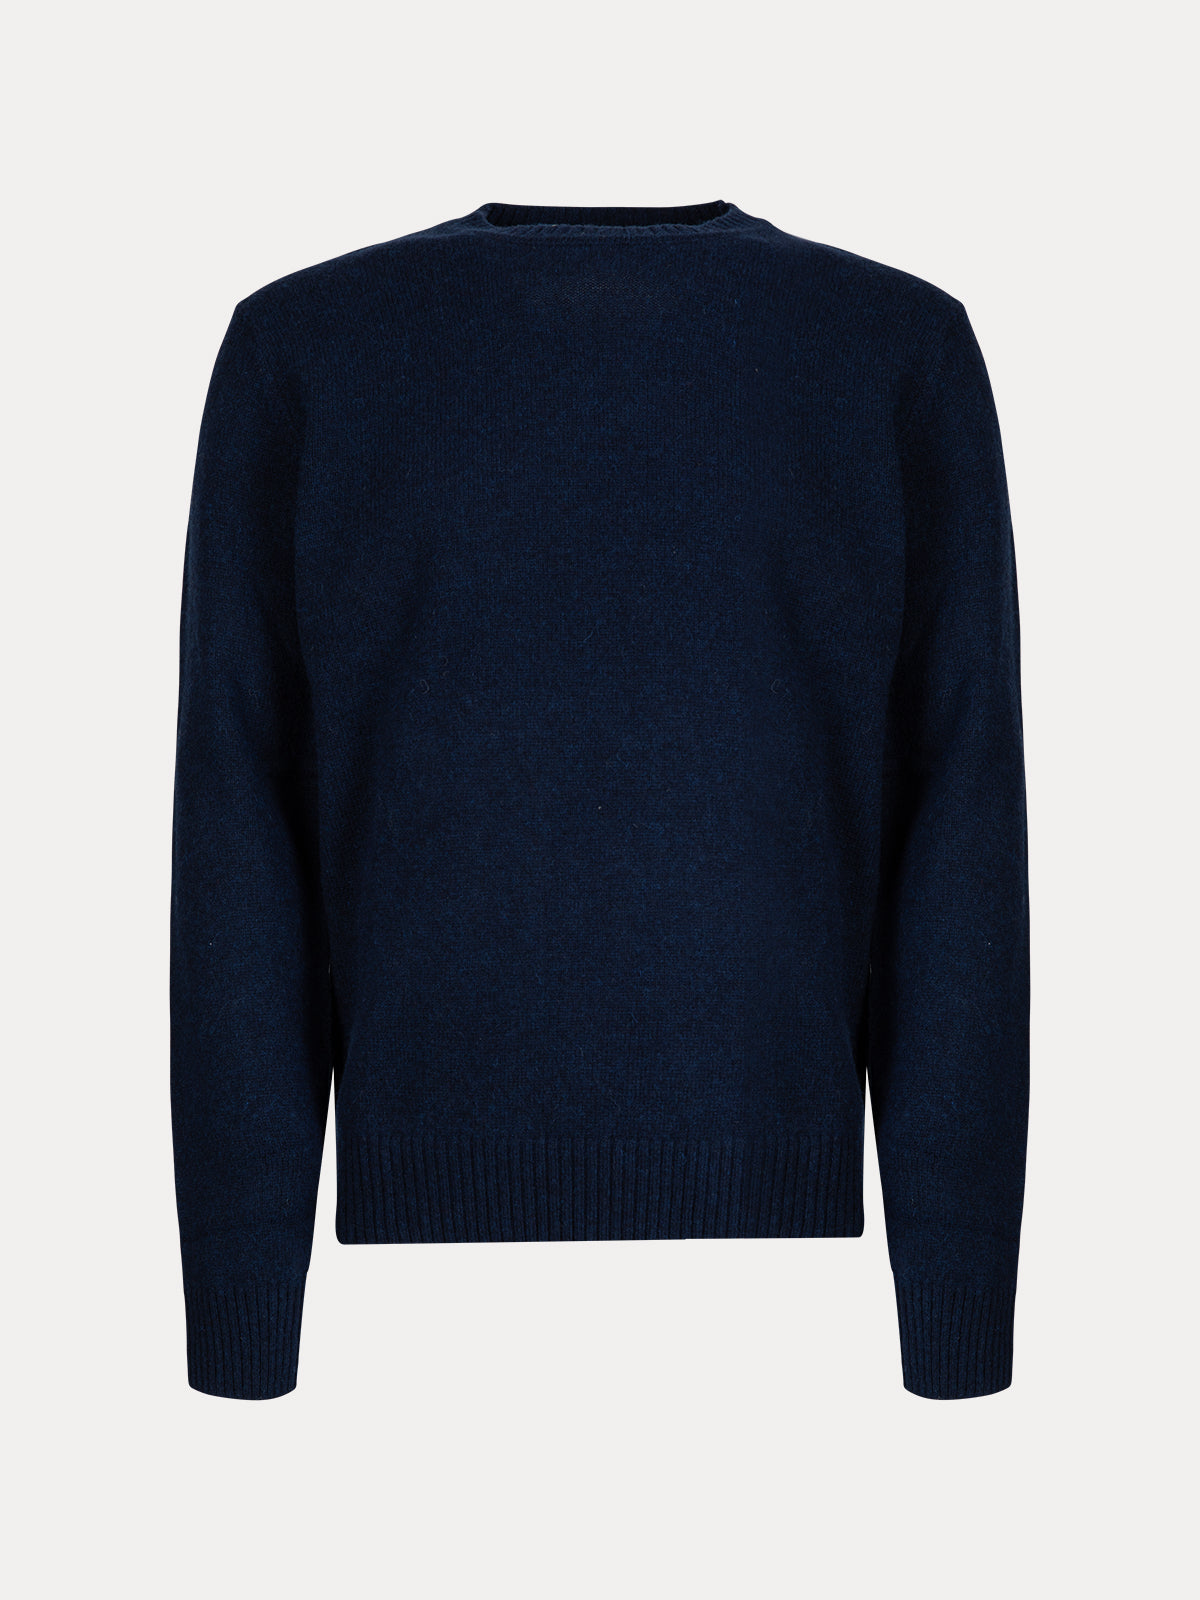 GAFFISTORE PULLOVER GIROCOLLO IN MOULINE' NAVY IMPURE